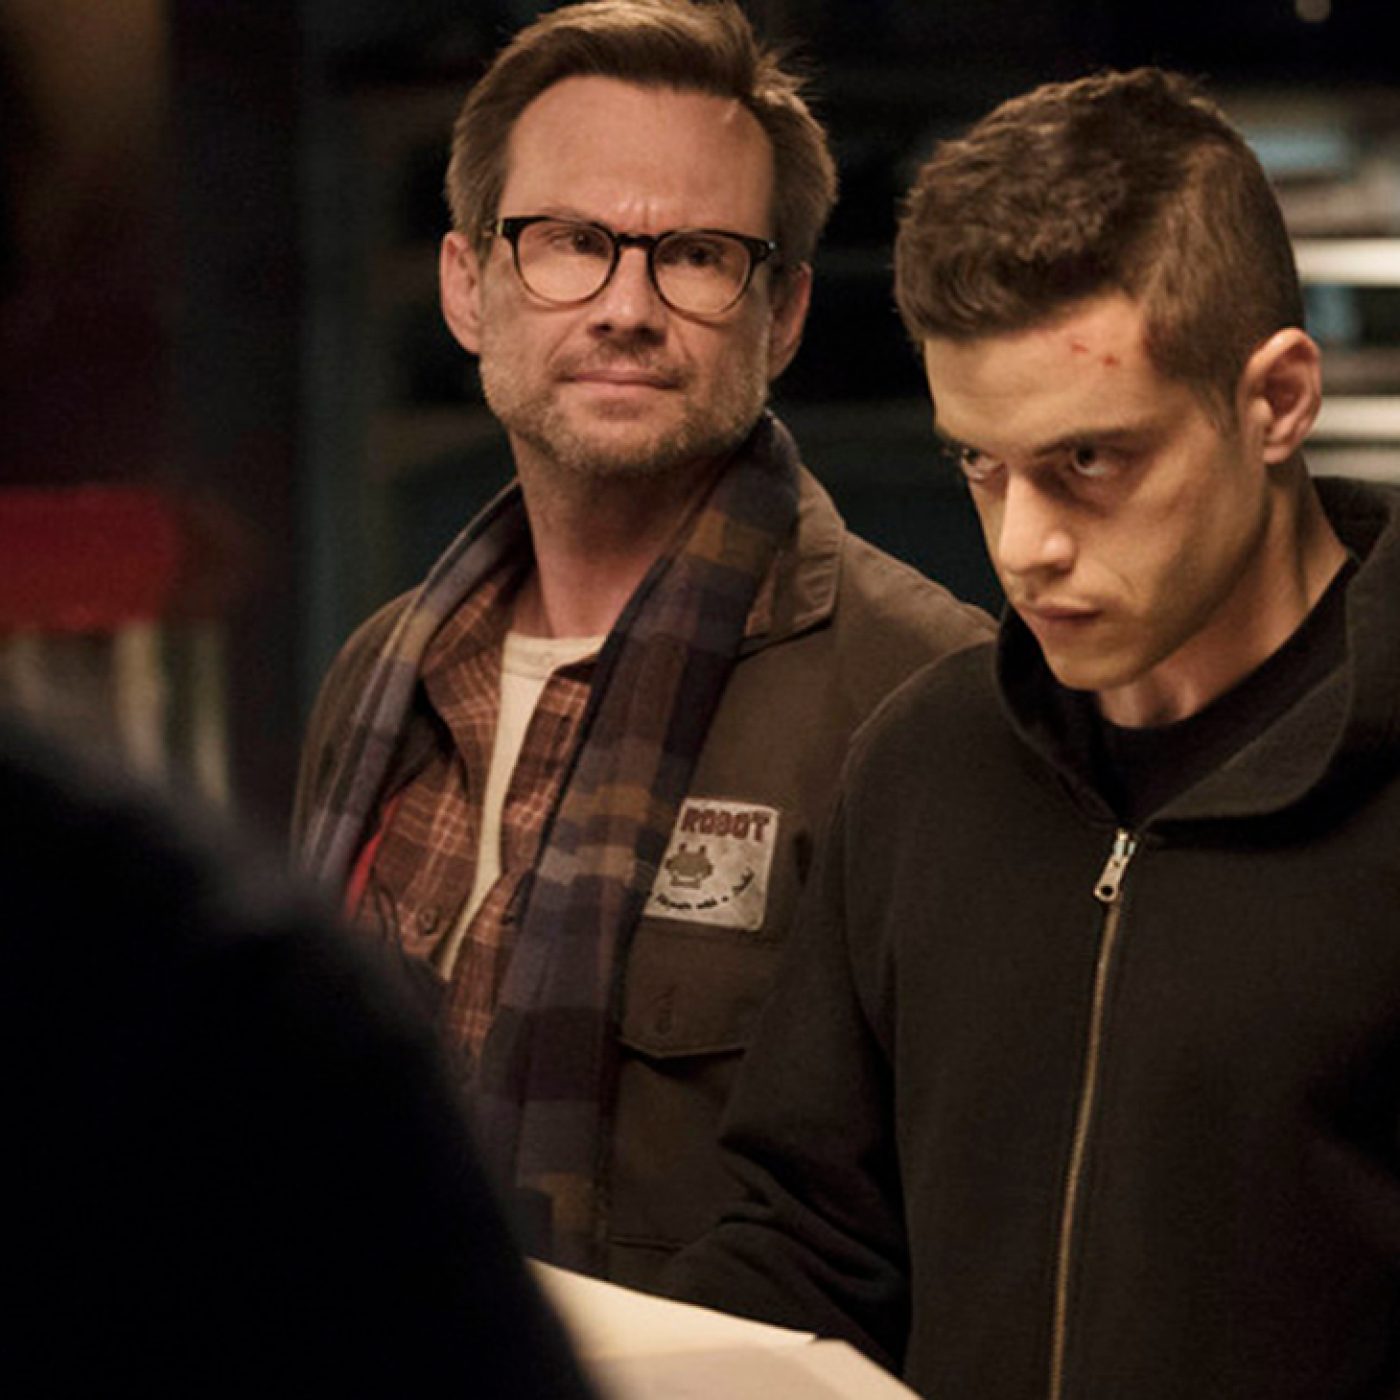 Mr. Robot' Sam Esmail Interview for Season 2 – The Hollywood Reporter